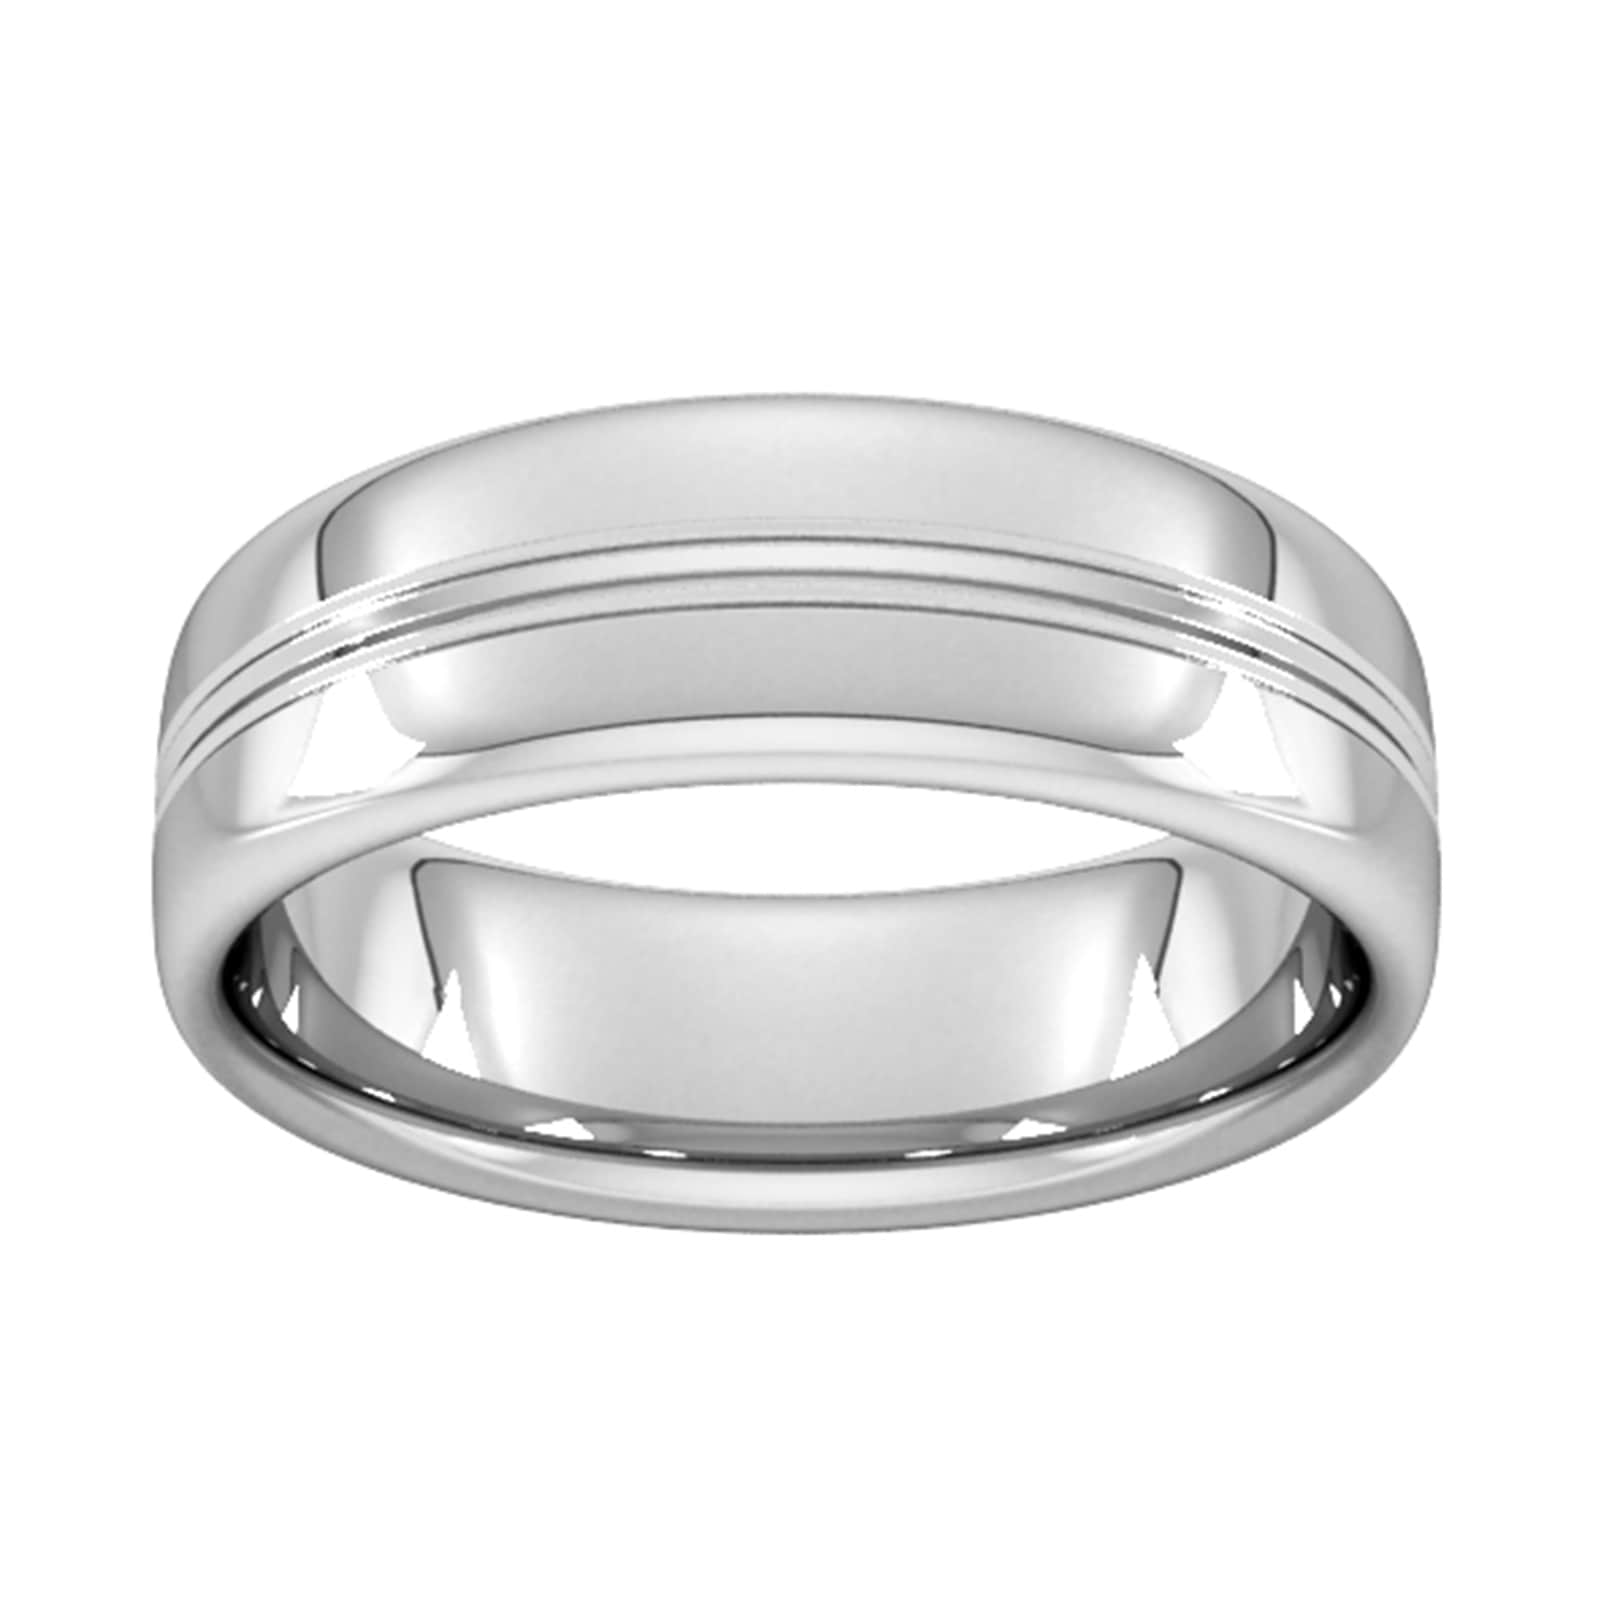 7mm Slight Court Standard Grooved Polished Finish Wedding Ring In 18 Carat White Gold - Ring Size O